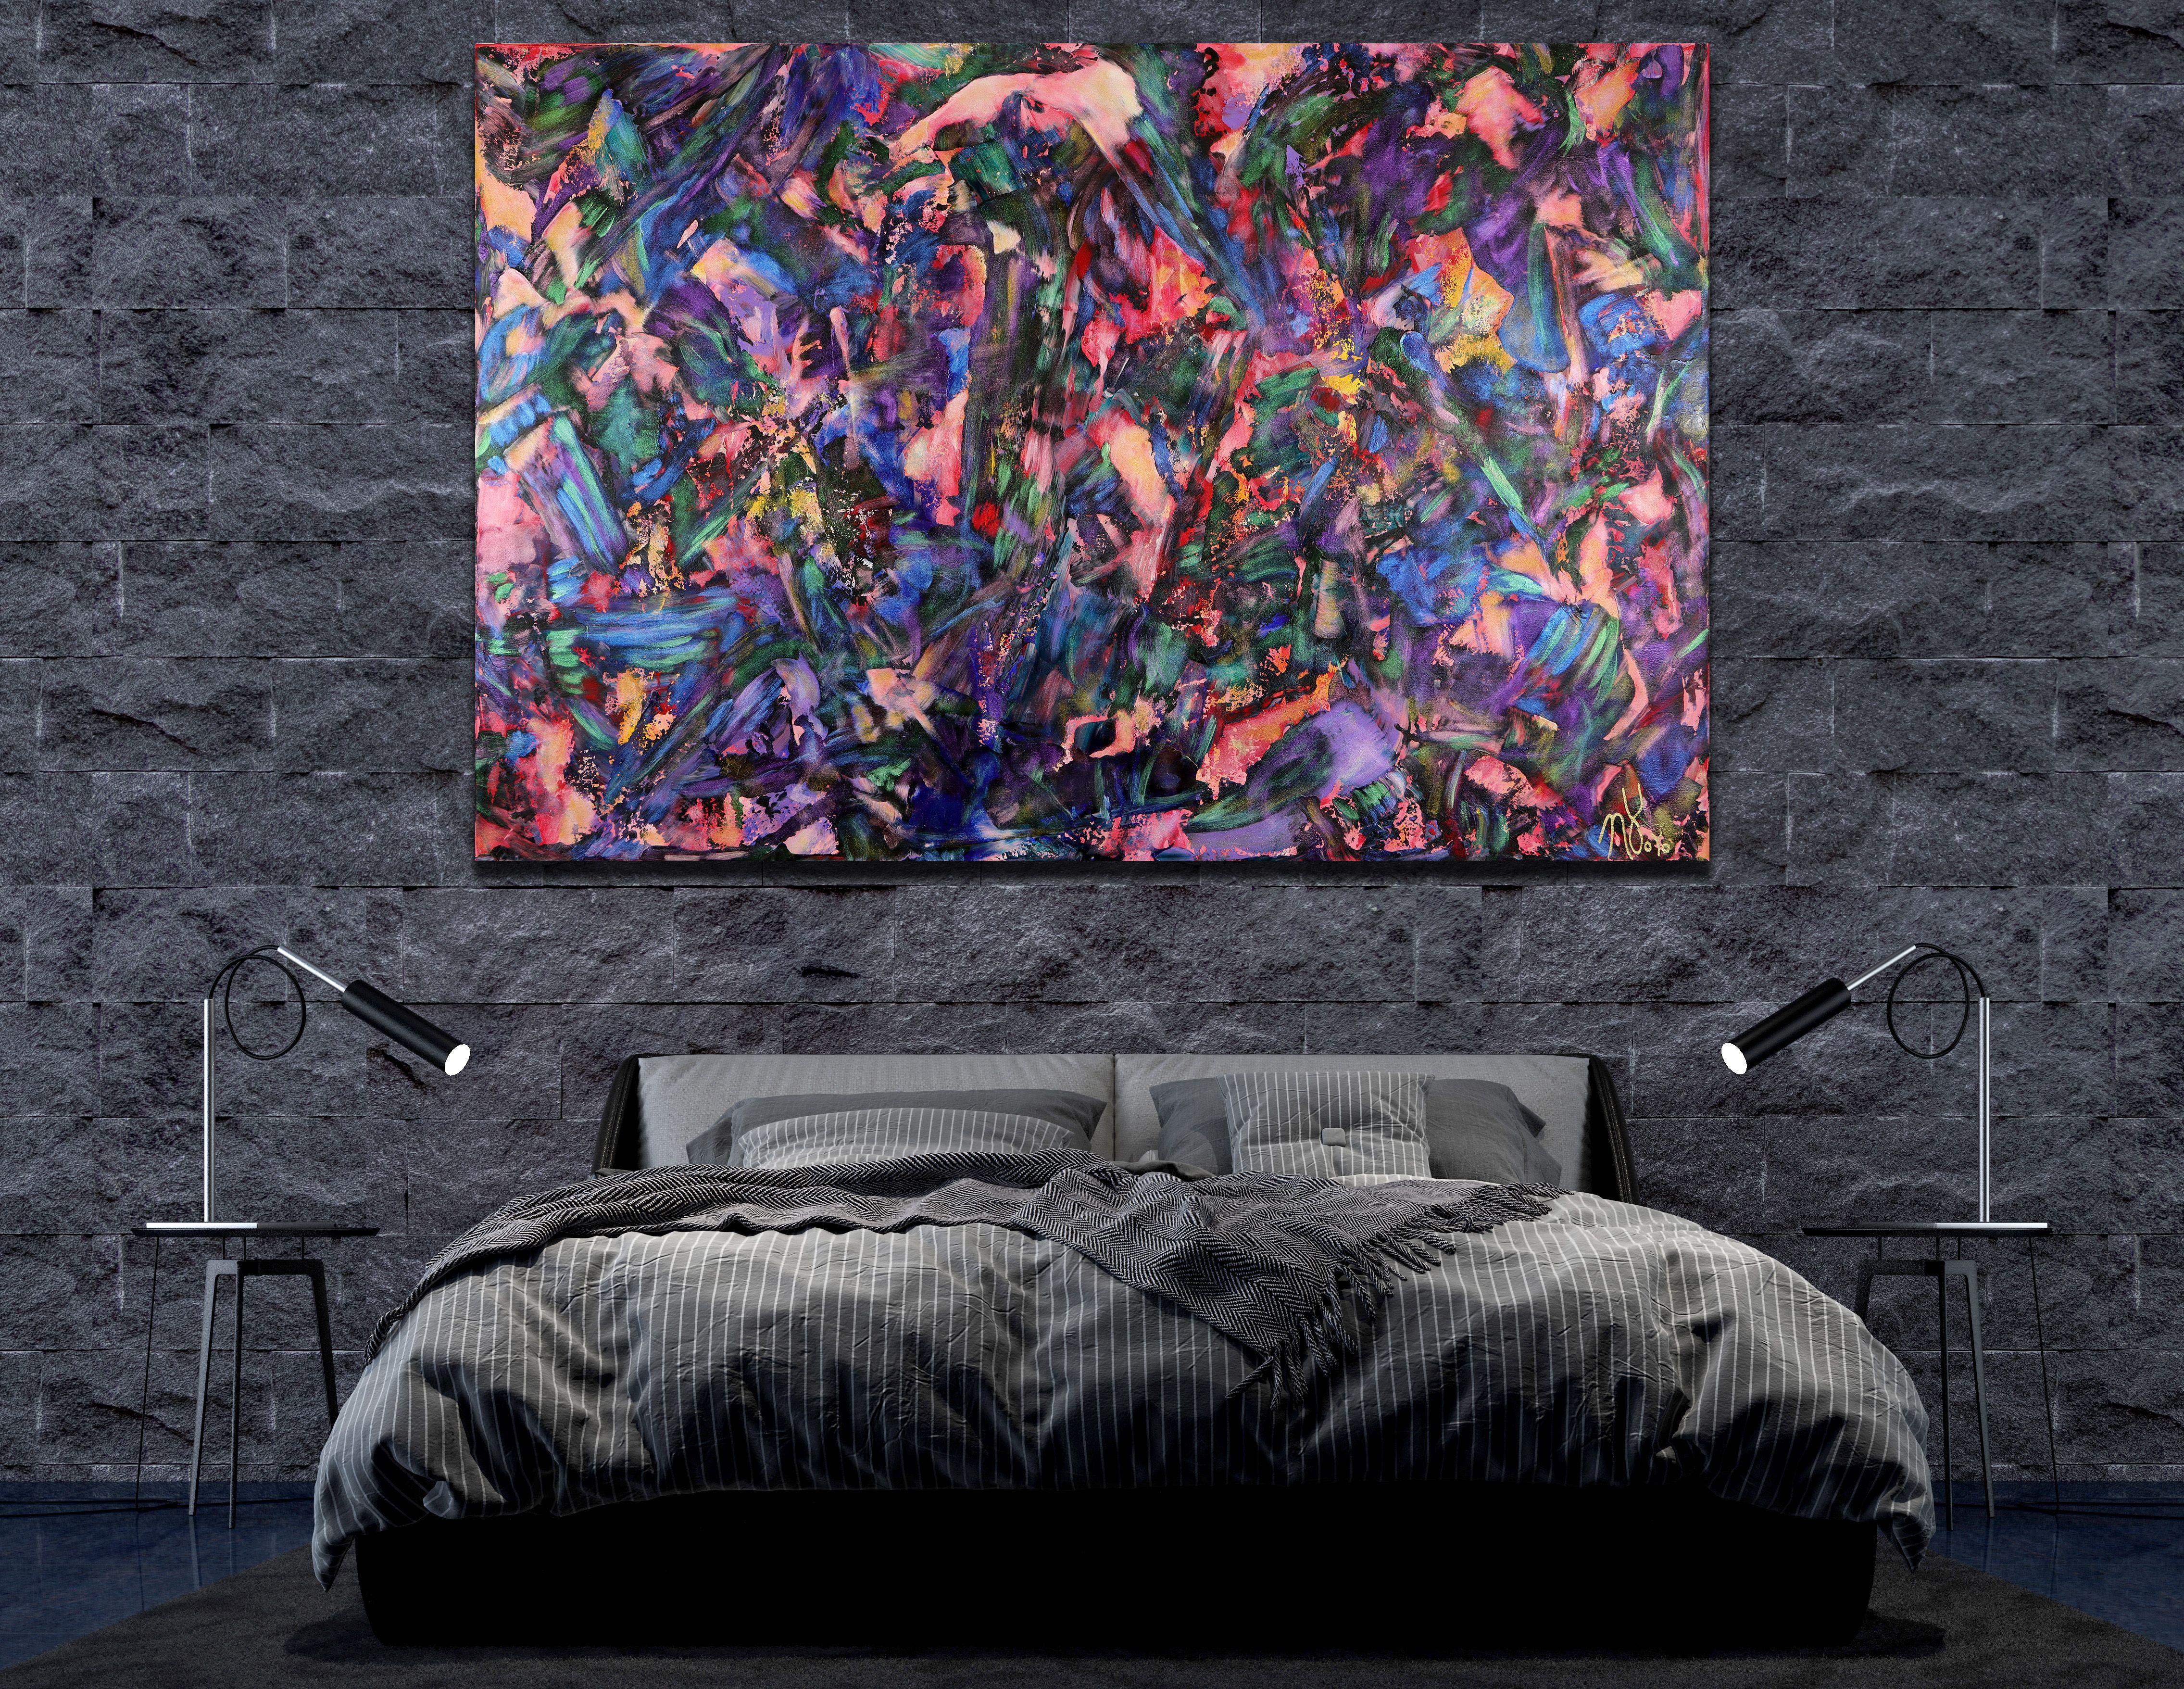 This artwork was created layering and blending thick layers of black and magenta covered with iridescent colors, Including red, purple, blue and yellow completed with iridescent gold effects. The iridescent quality of the paint gives the painting a